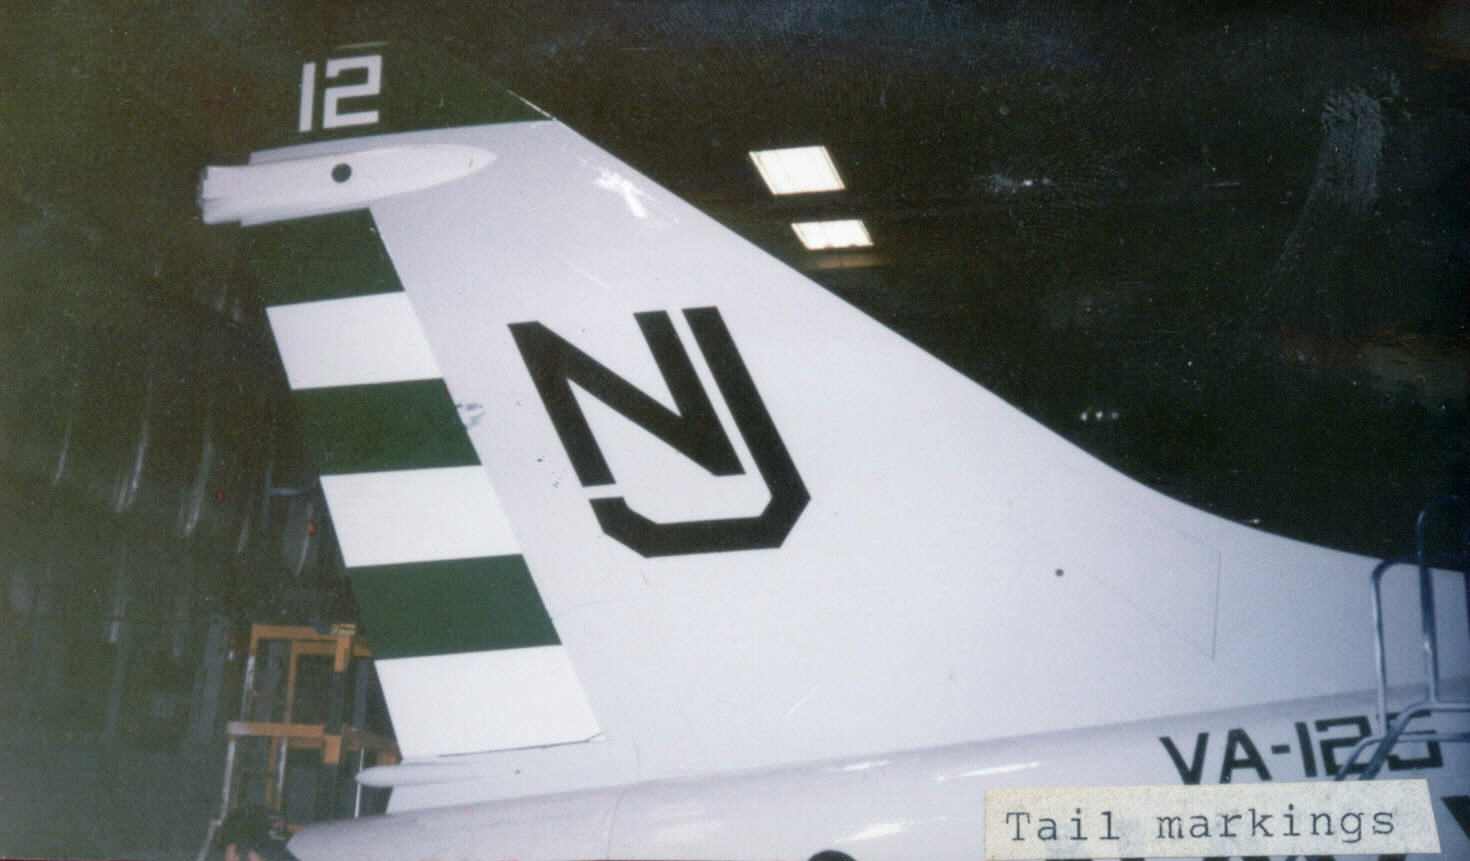 Tail numbers of the A-7 Corsair from VA-125 in Lemoore California